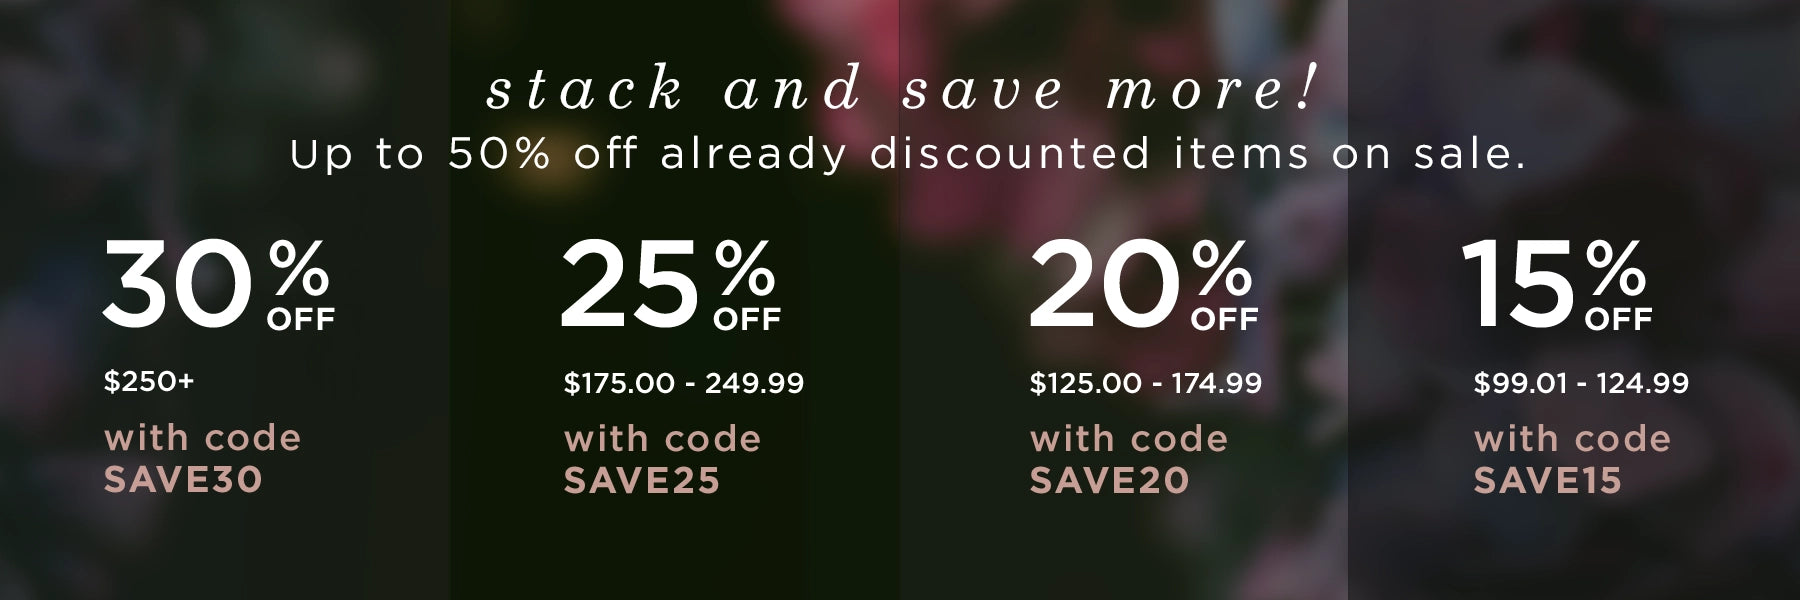 stack and save more! up to 50% off already discounted items on sale. 30% off $250+ with code save30, 25% off $175-249 with code save25, 20% off $125 -174.99 with code save20, 15% off $99.01 - $124.99 with code save15